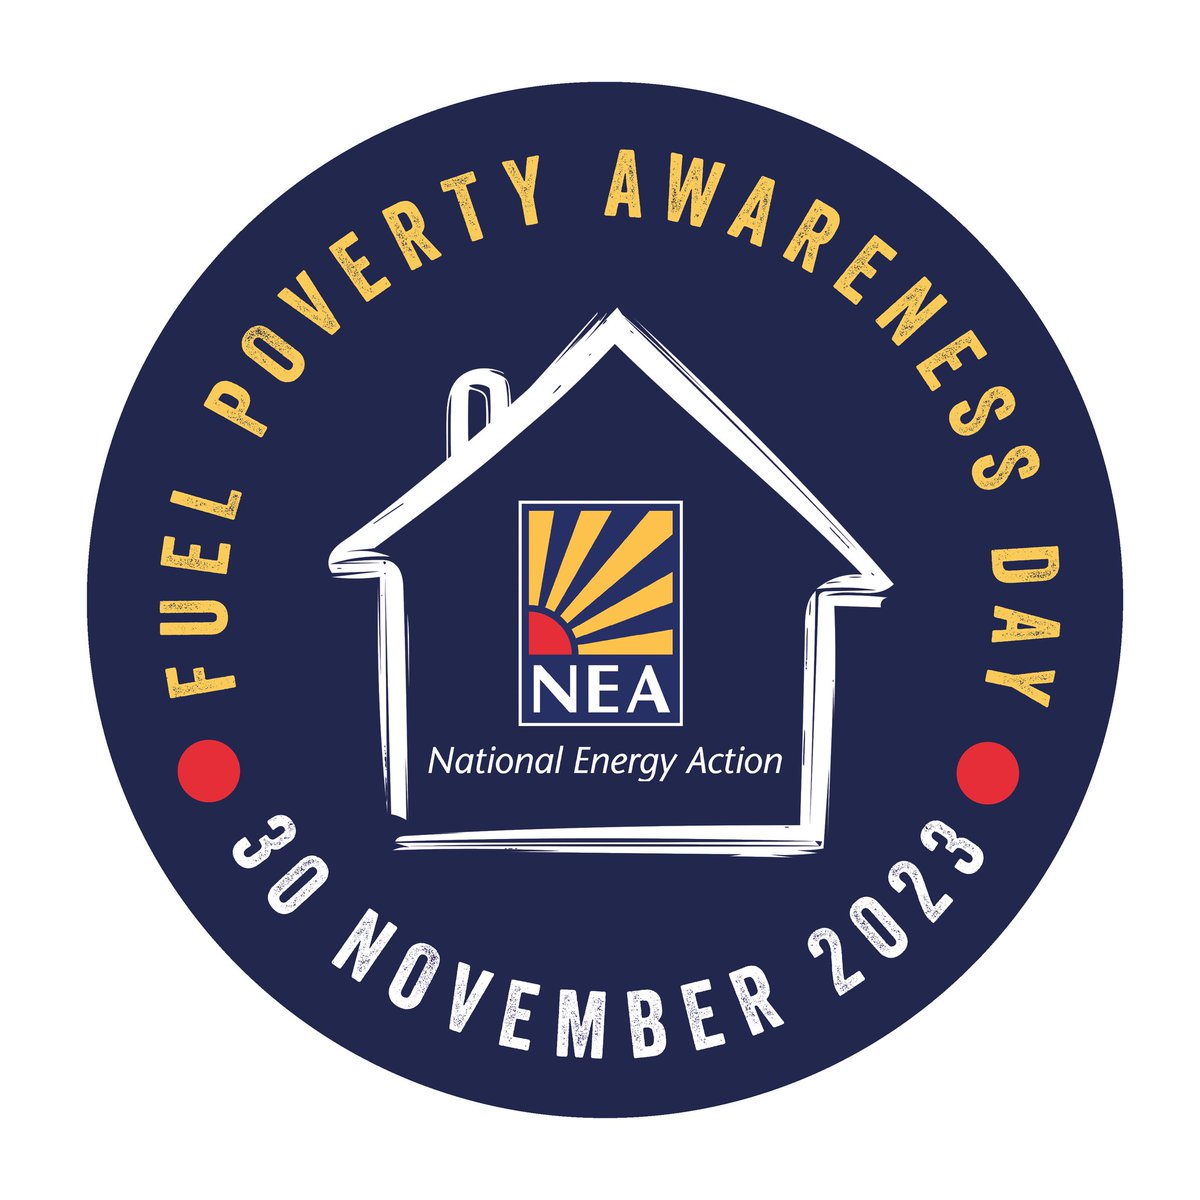 Today is our #FuelPovertyAwarenessDay. 6.5 million UK households will be in fuel poverty from January and our work has never been needed more. By working together we can make a difference.